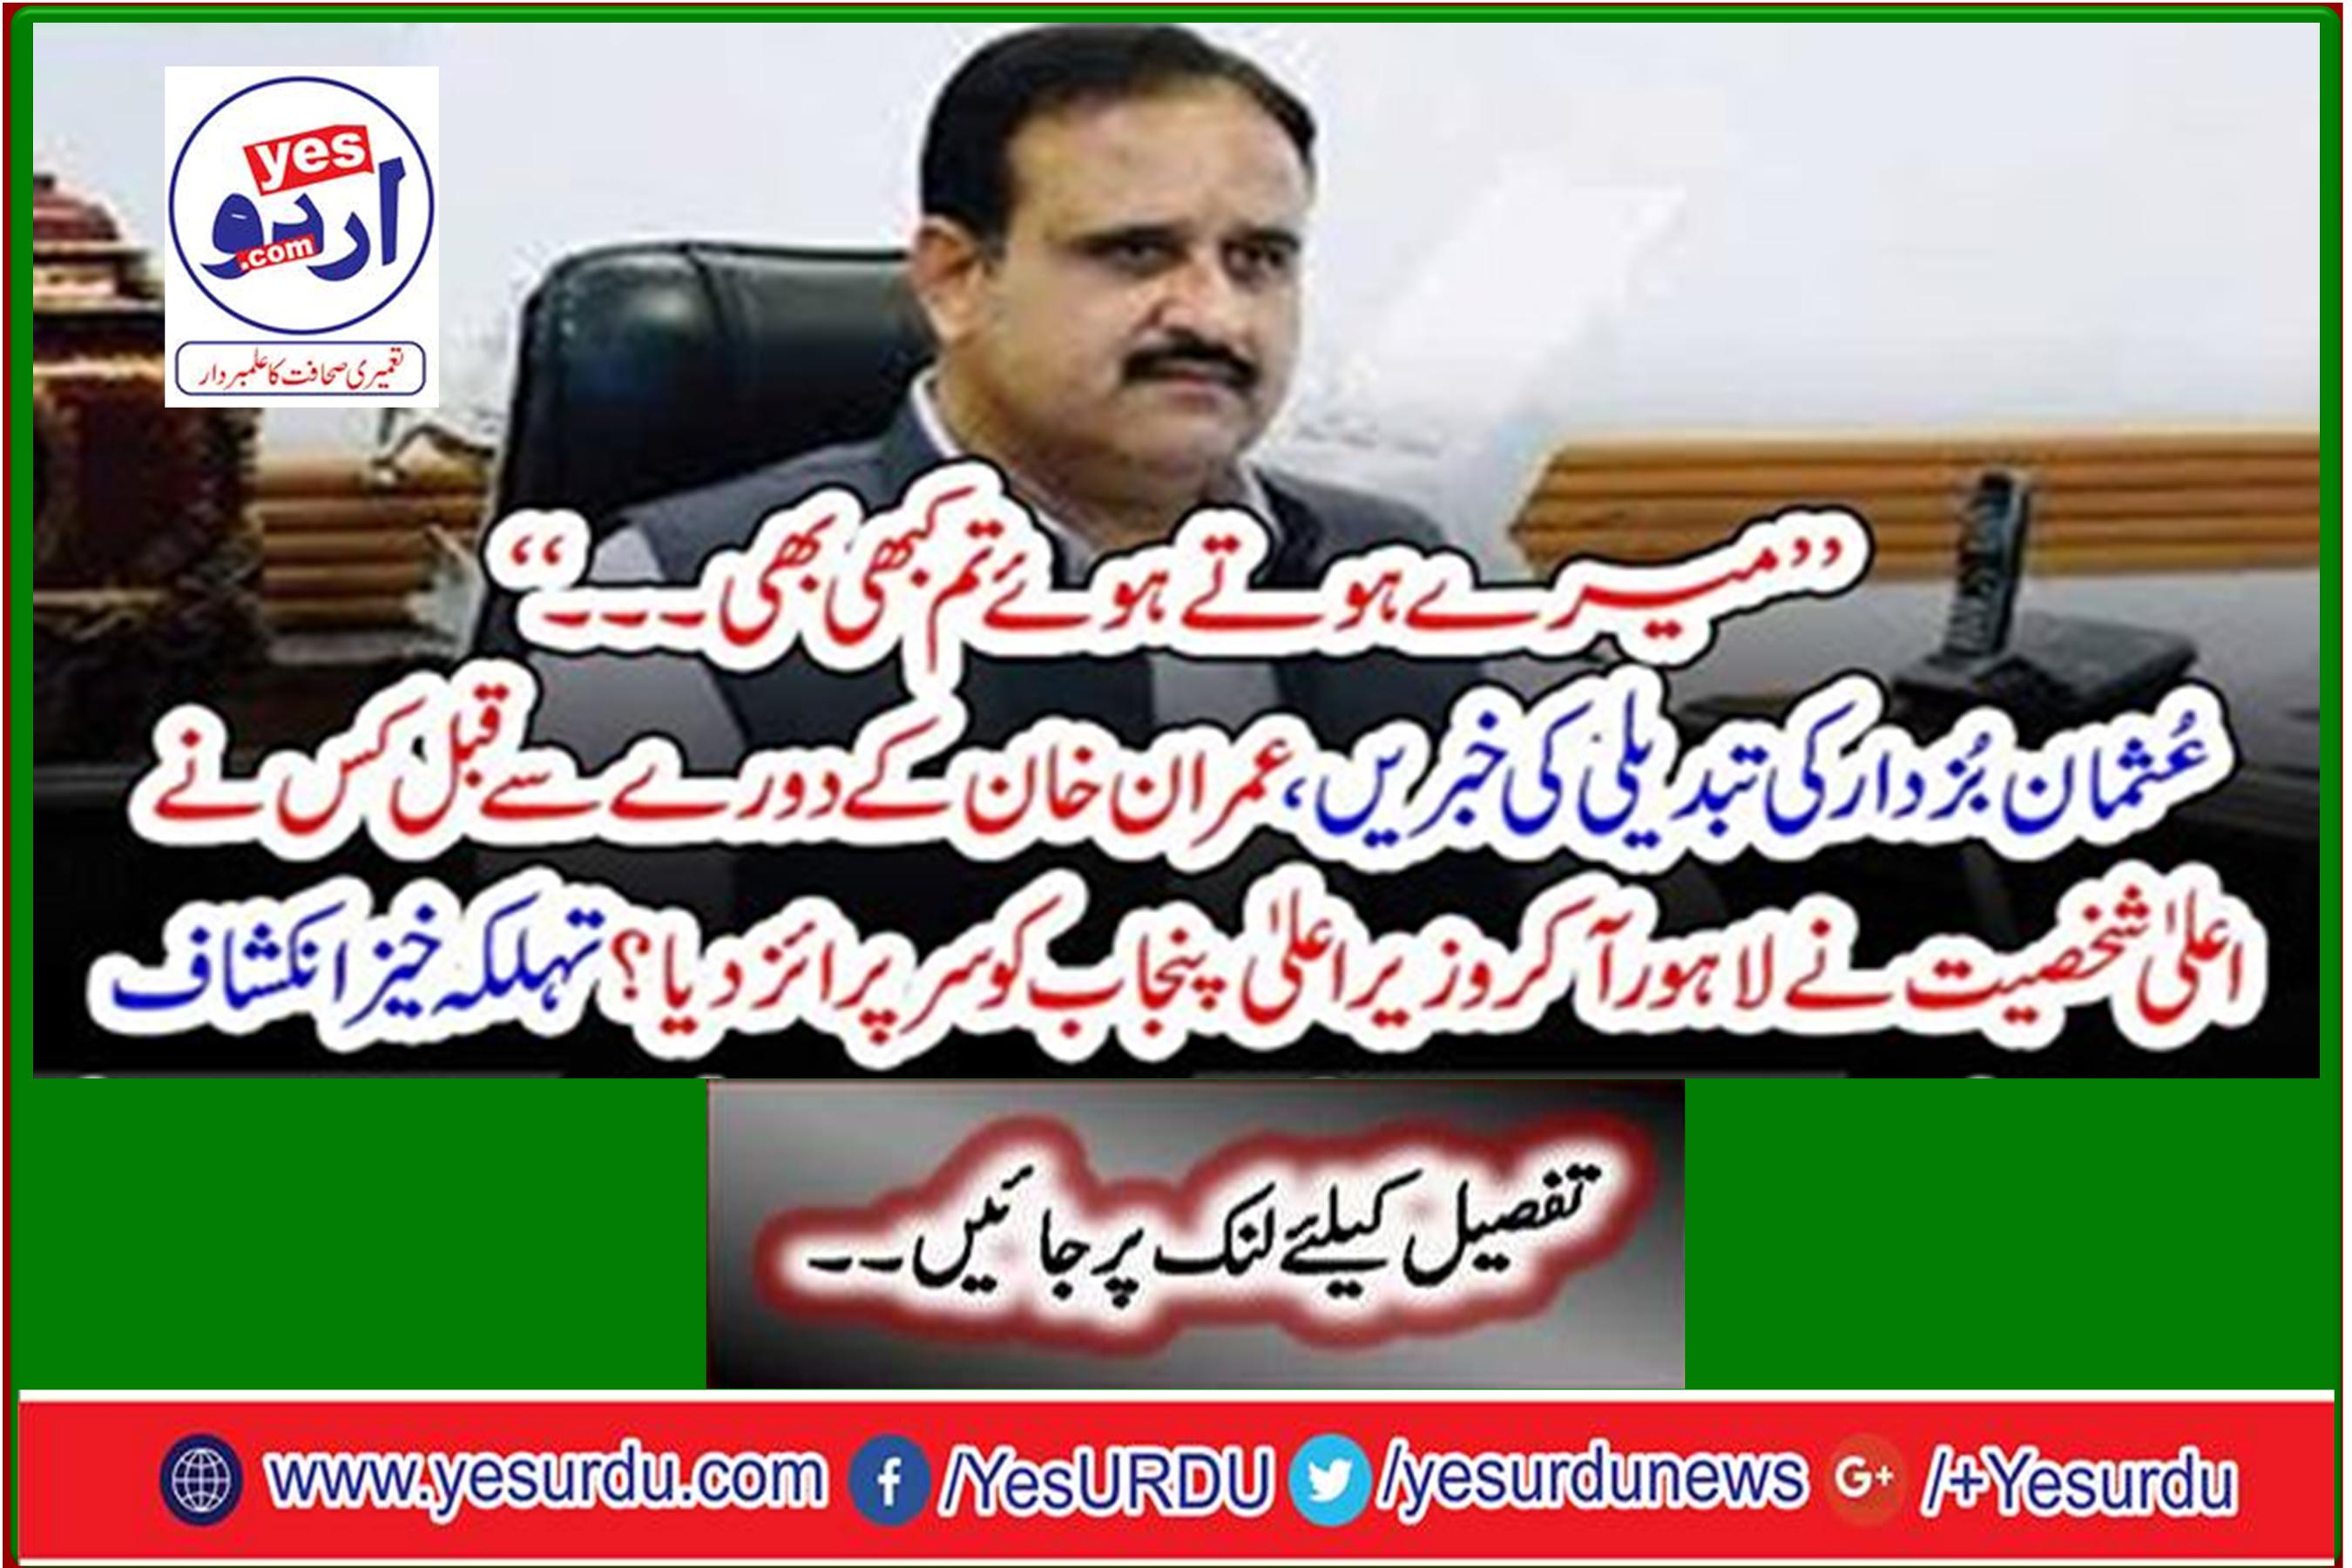 'News of Usman Buzdar's transformation; Before the visit of Imran Khan, who had come to Lahore and made a surprise visit to the Chief Minister Punjab? Spicy disclosure